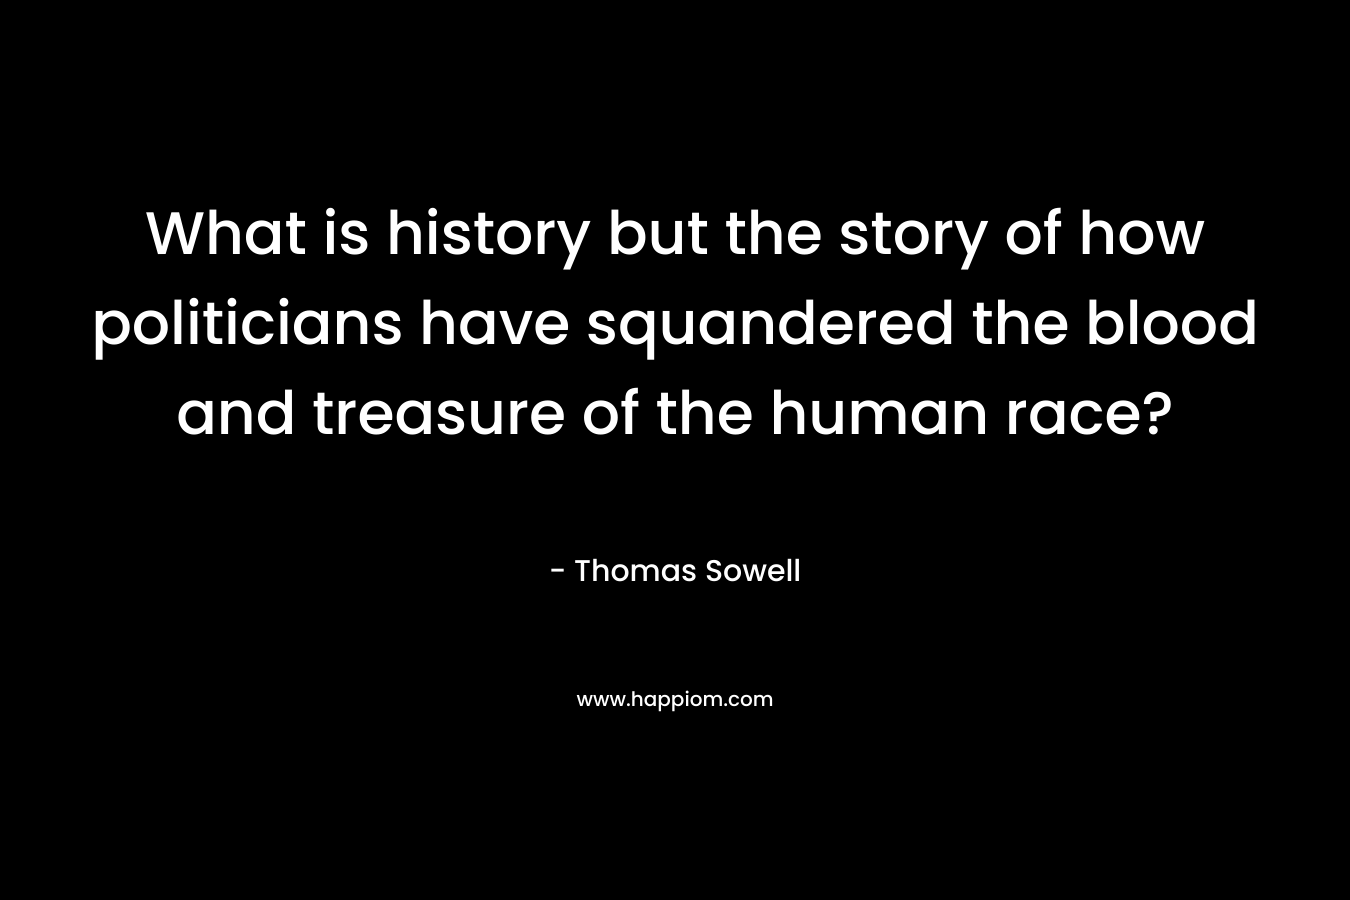 What is history but the story of how politicians have squandered the blood and treasure of the human race? – Thomas Sowell